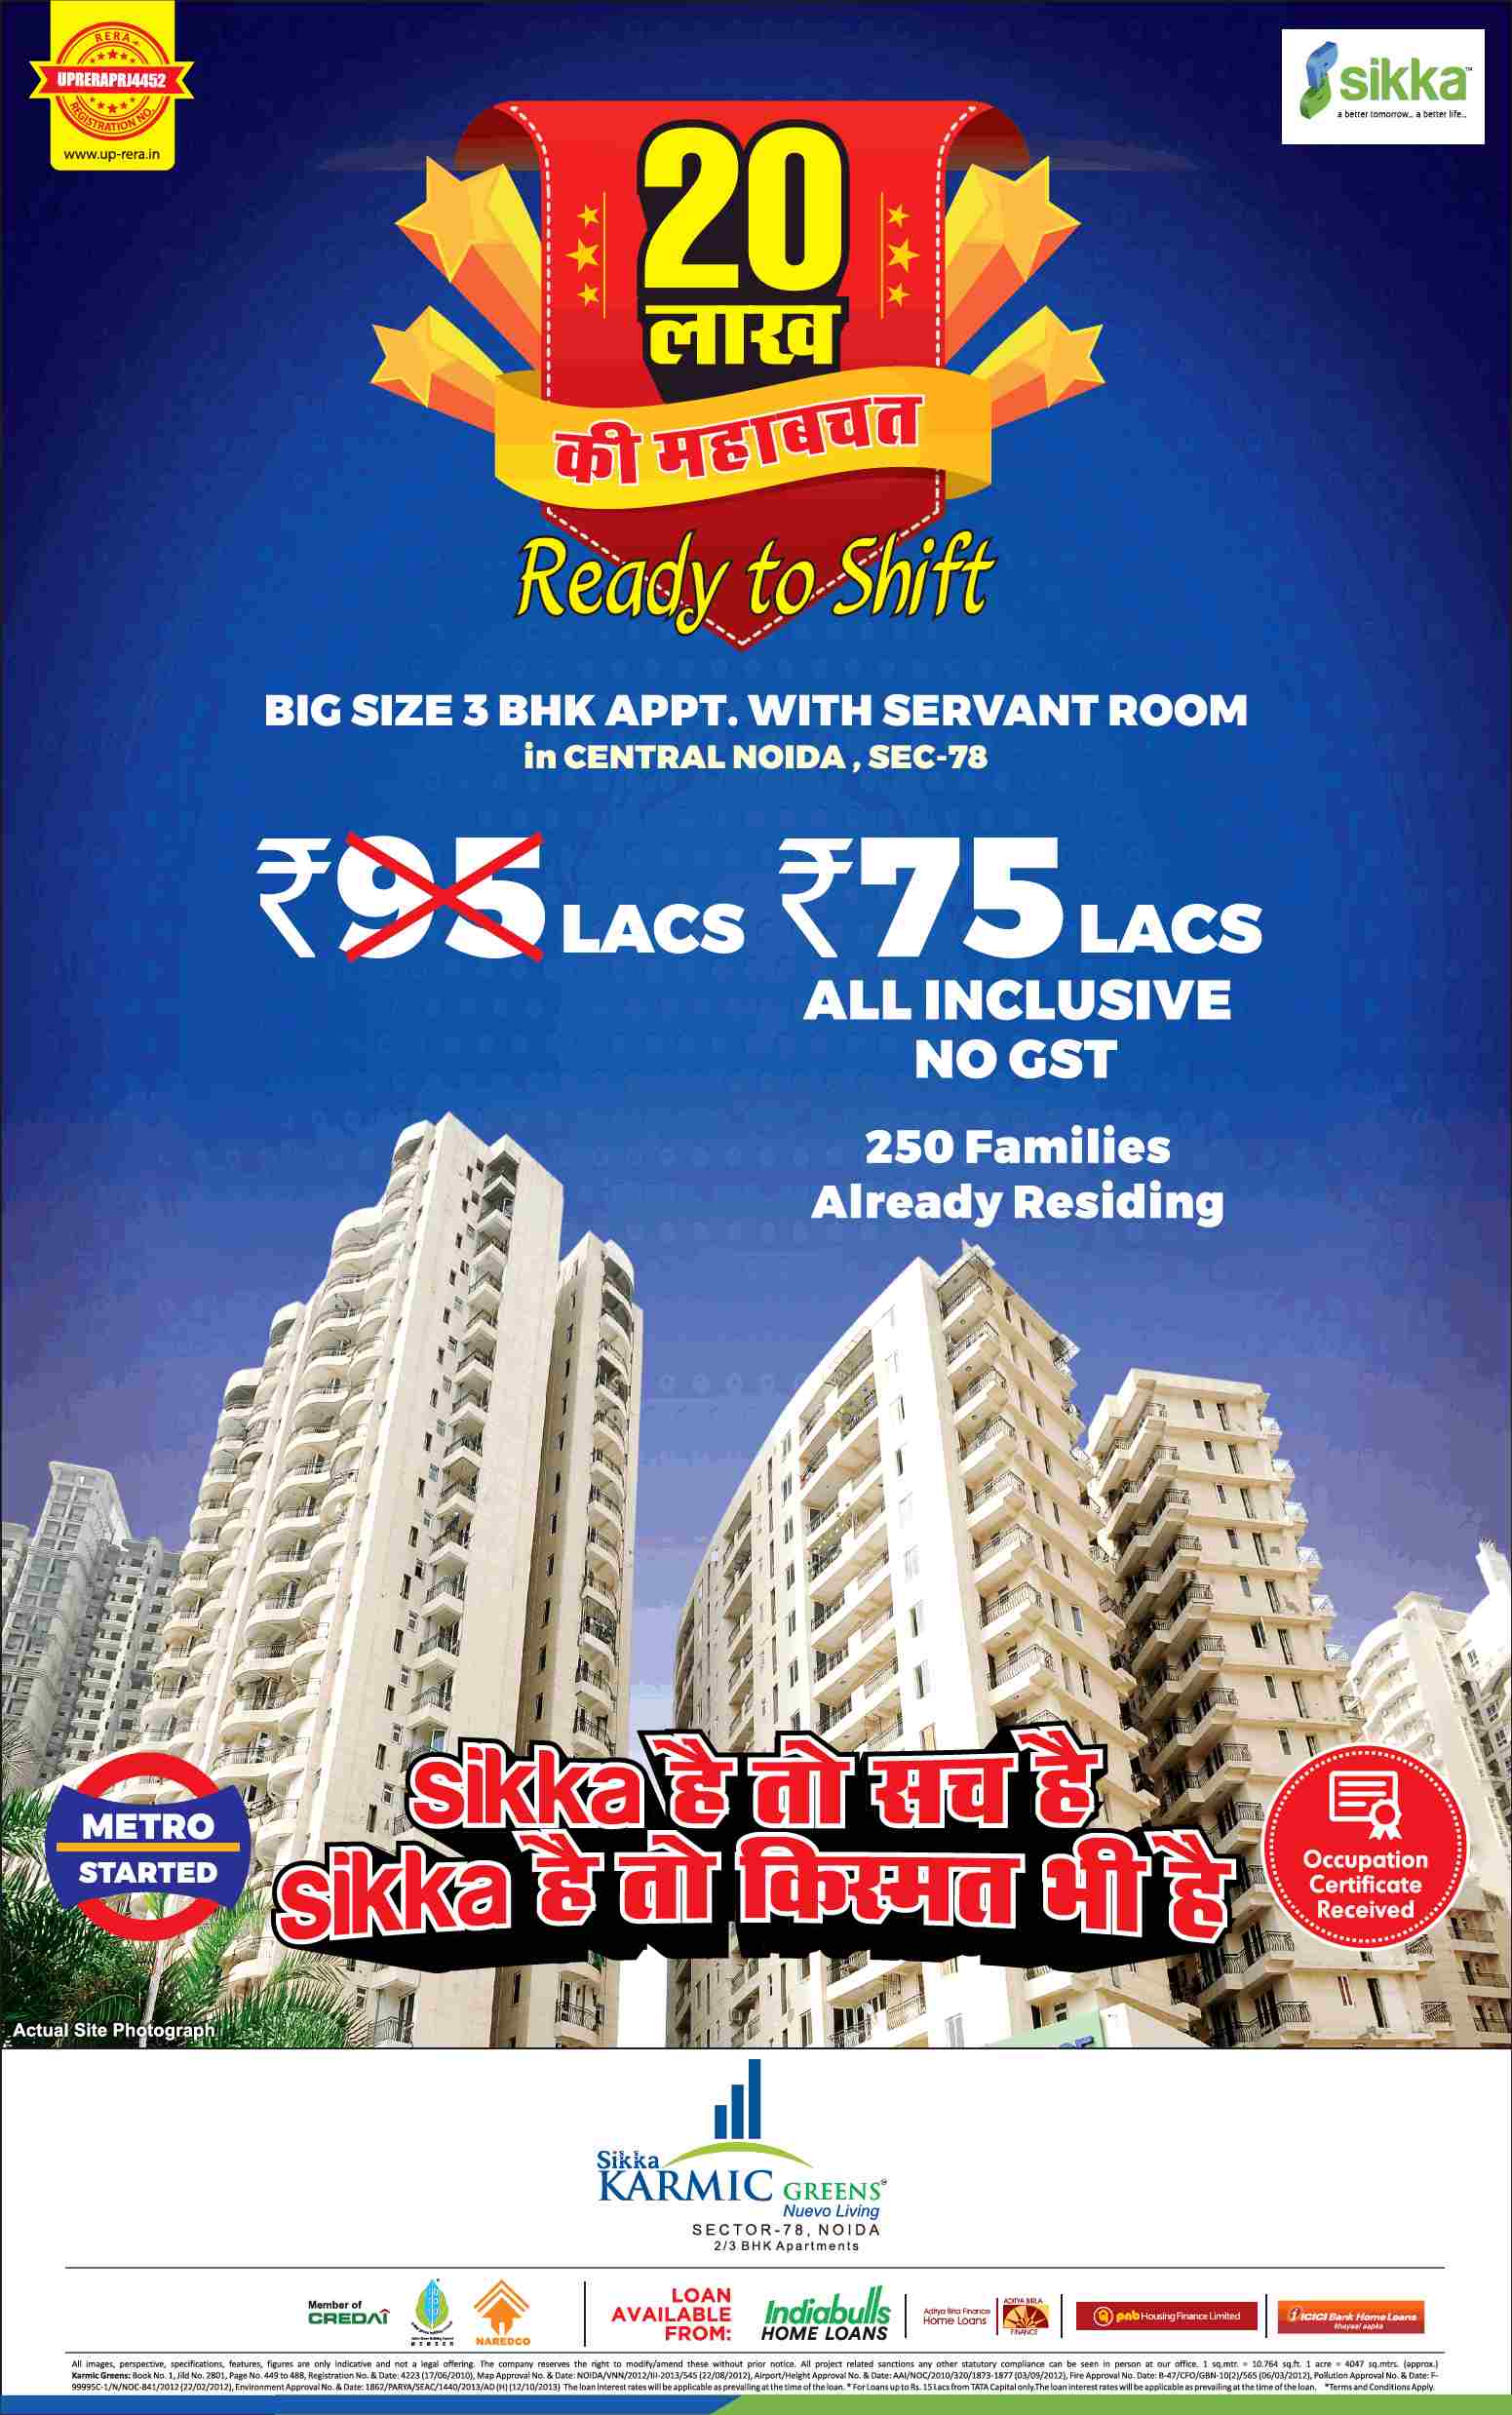 Book 3 BHK apartment with servant room @ Rs. 75 Lacs at Sikka Karmic Greens in Noida